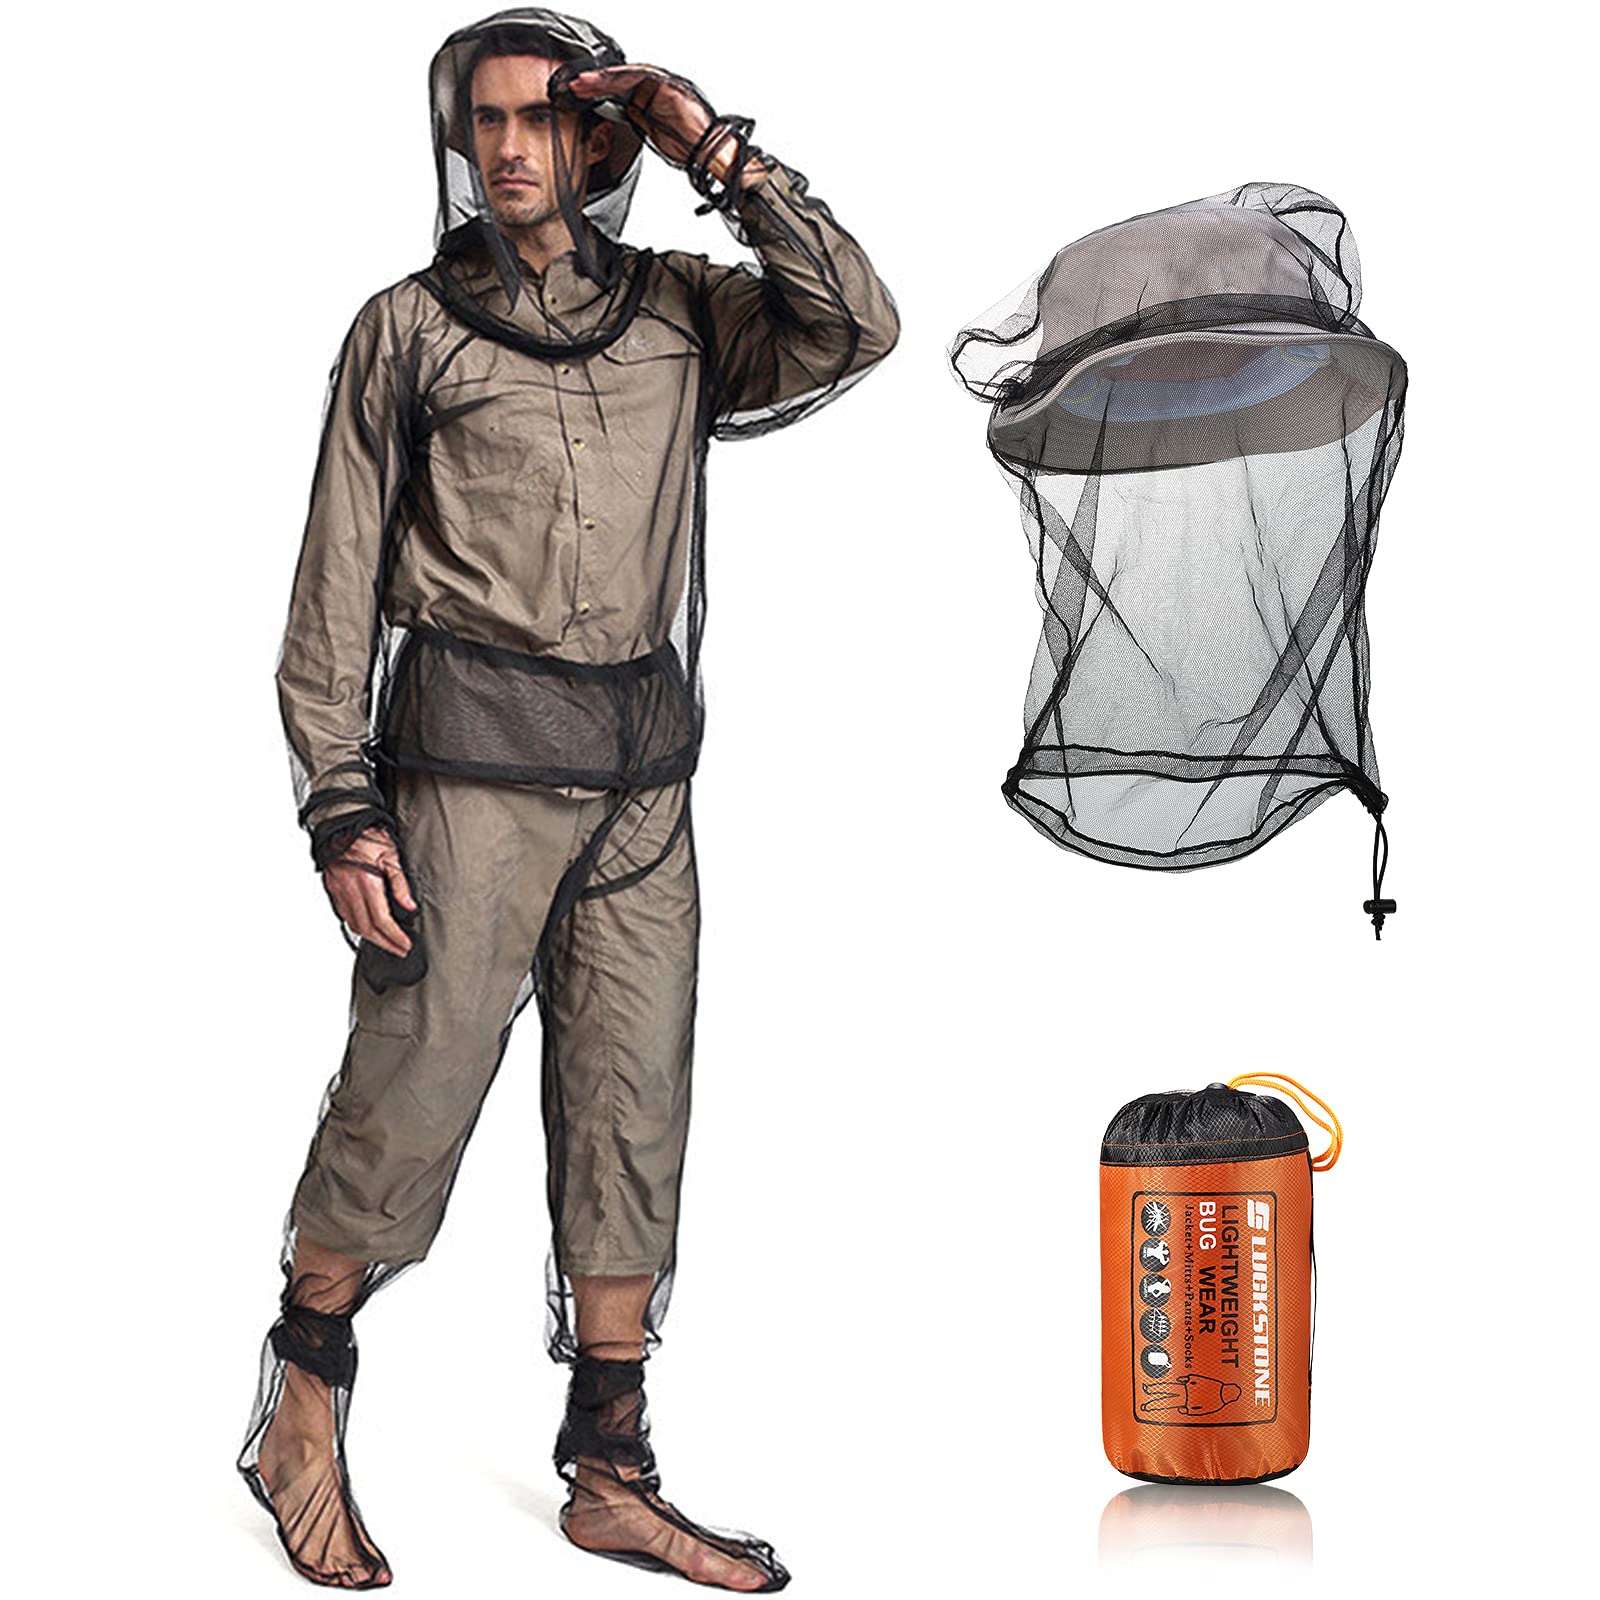 Mosquito Net Suit Include Bug Jacket Hood, Face Covering, Pants Net, Leg  Gaiter, Gloves and Storage Sack Mosquito Net Protecting Whole Body  Repellent Clothing for Outdoor Camping Fly Fishing